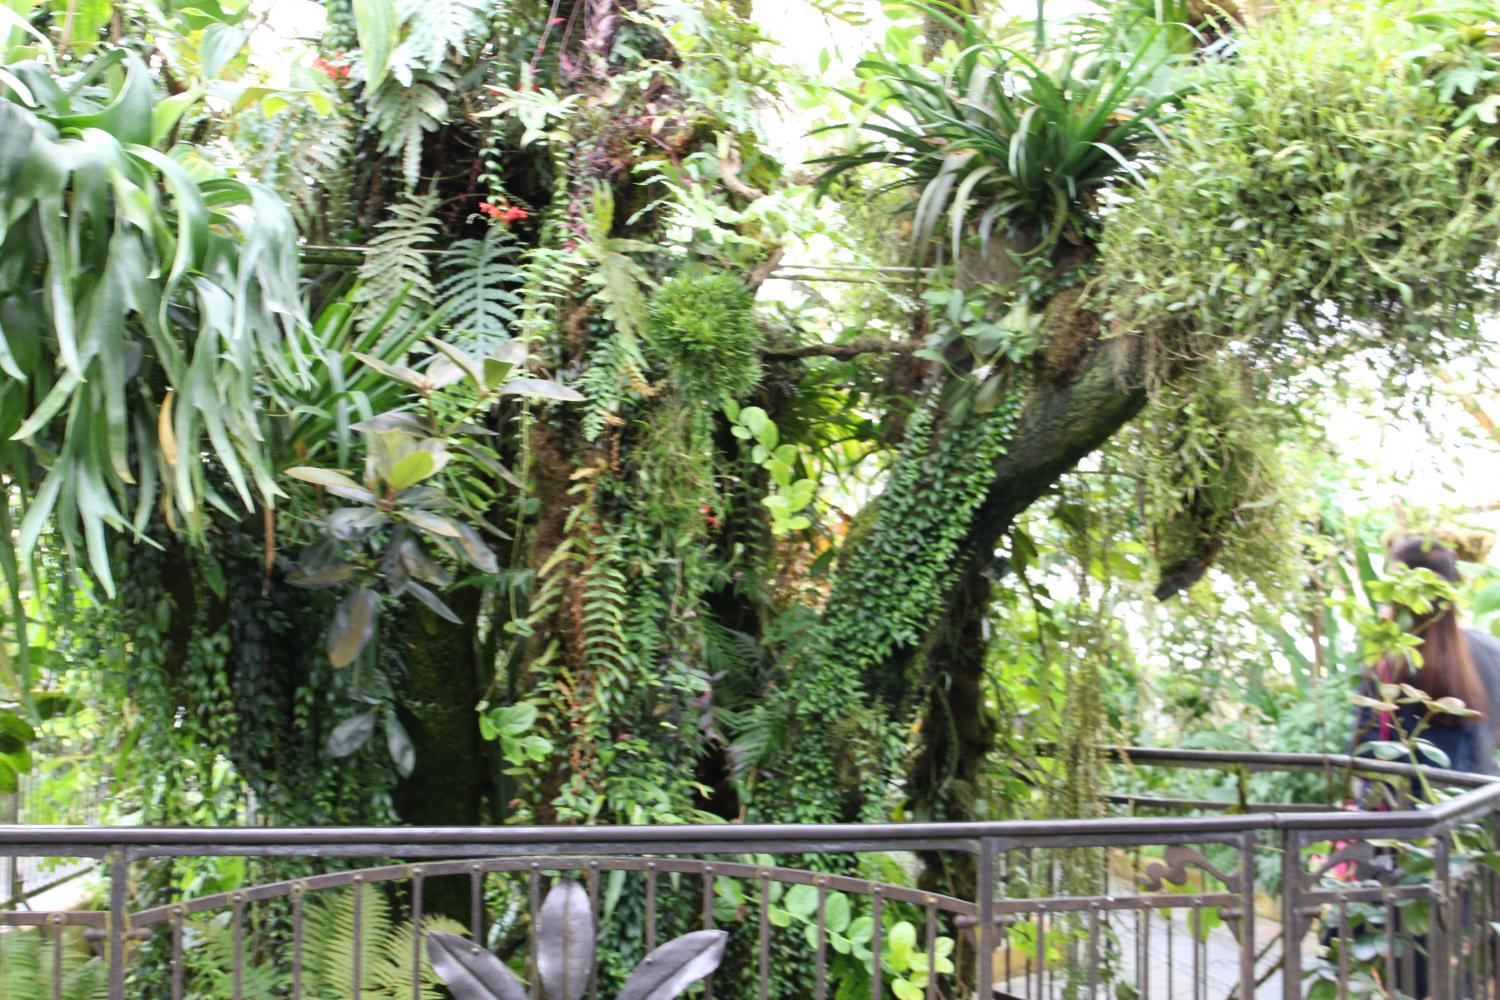 The Highland Tropics of the Flowers Conservatory presents a tropical setting in which high-altitude orchids, tree ferns, and dense mosses seek shelter in water-rich soil and foggy atmosphere.